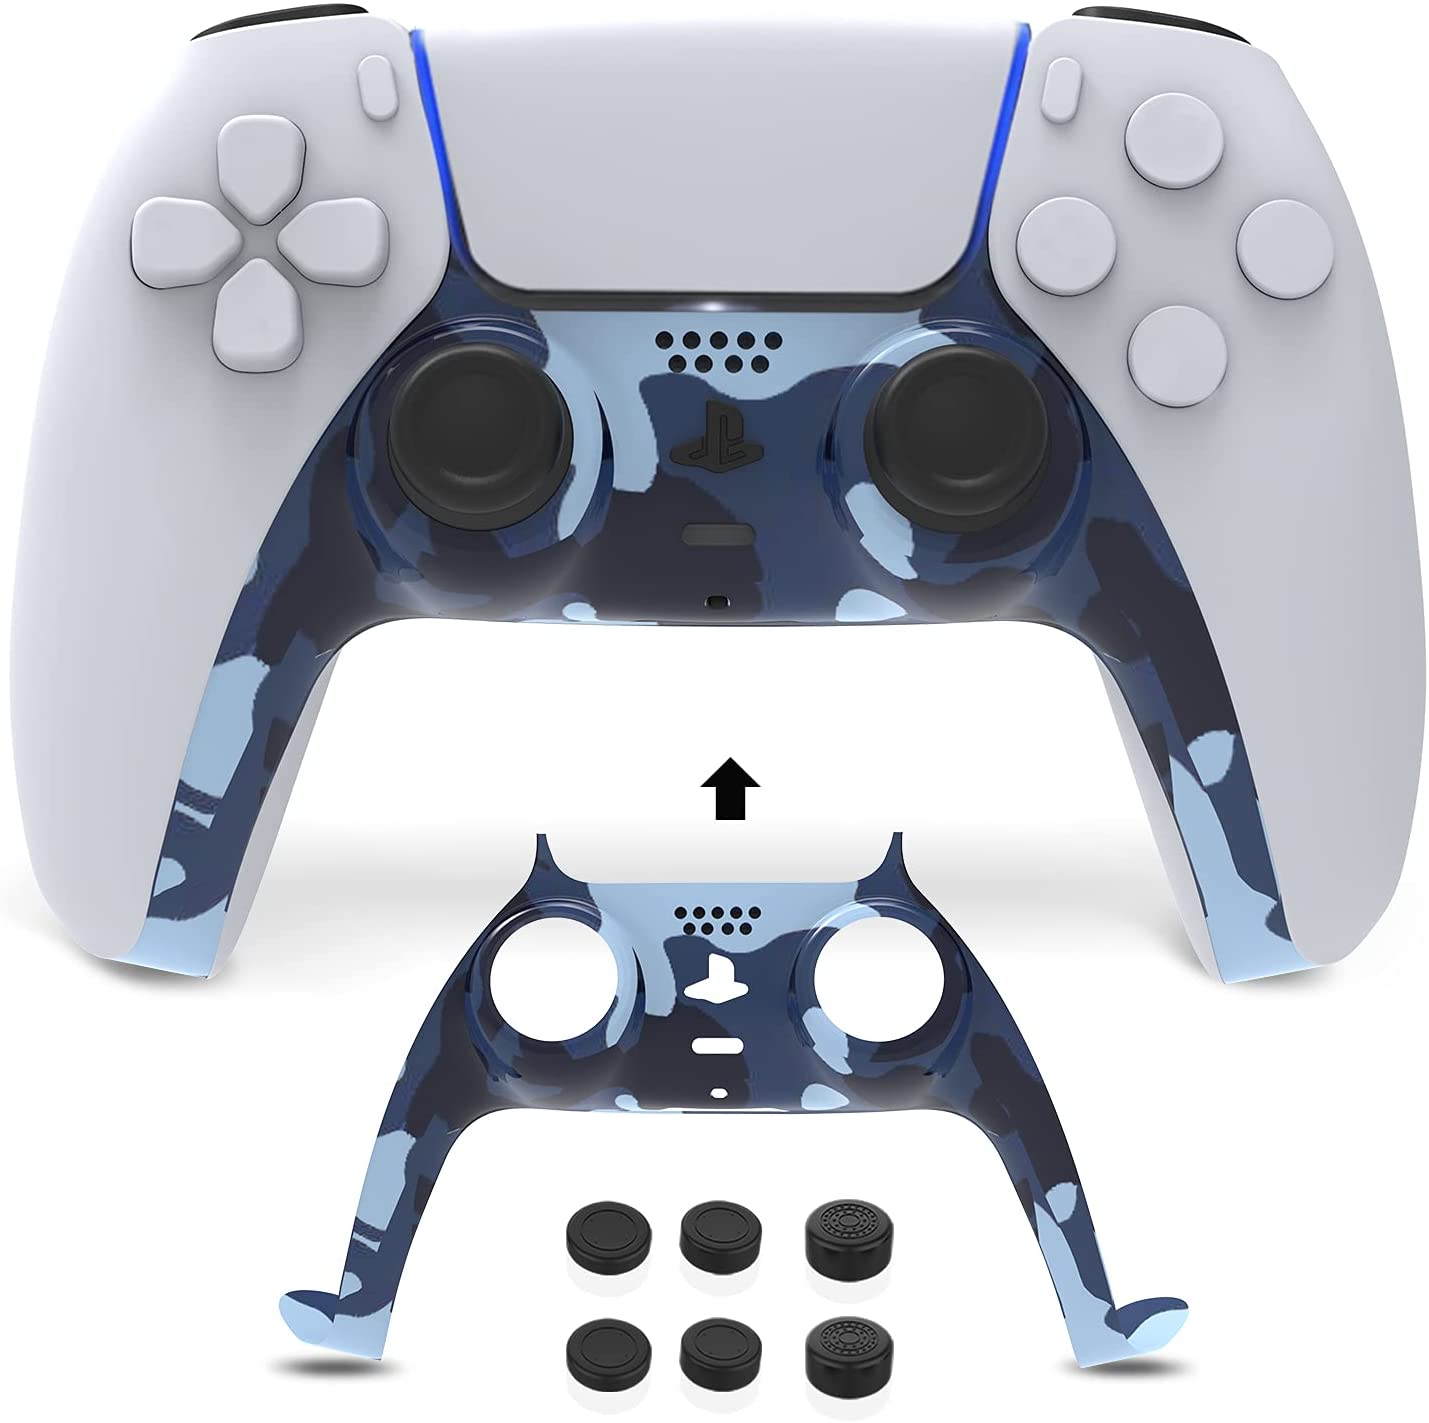 Blue camouflage PS5 controller faceplates are available, along with three pairs of replacement joystick caps.